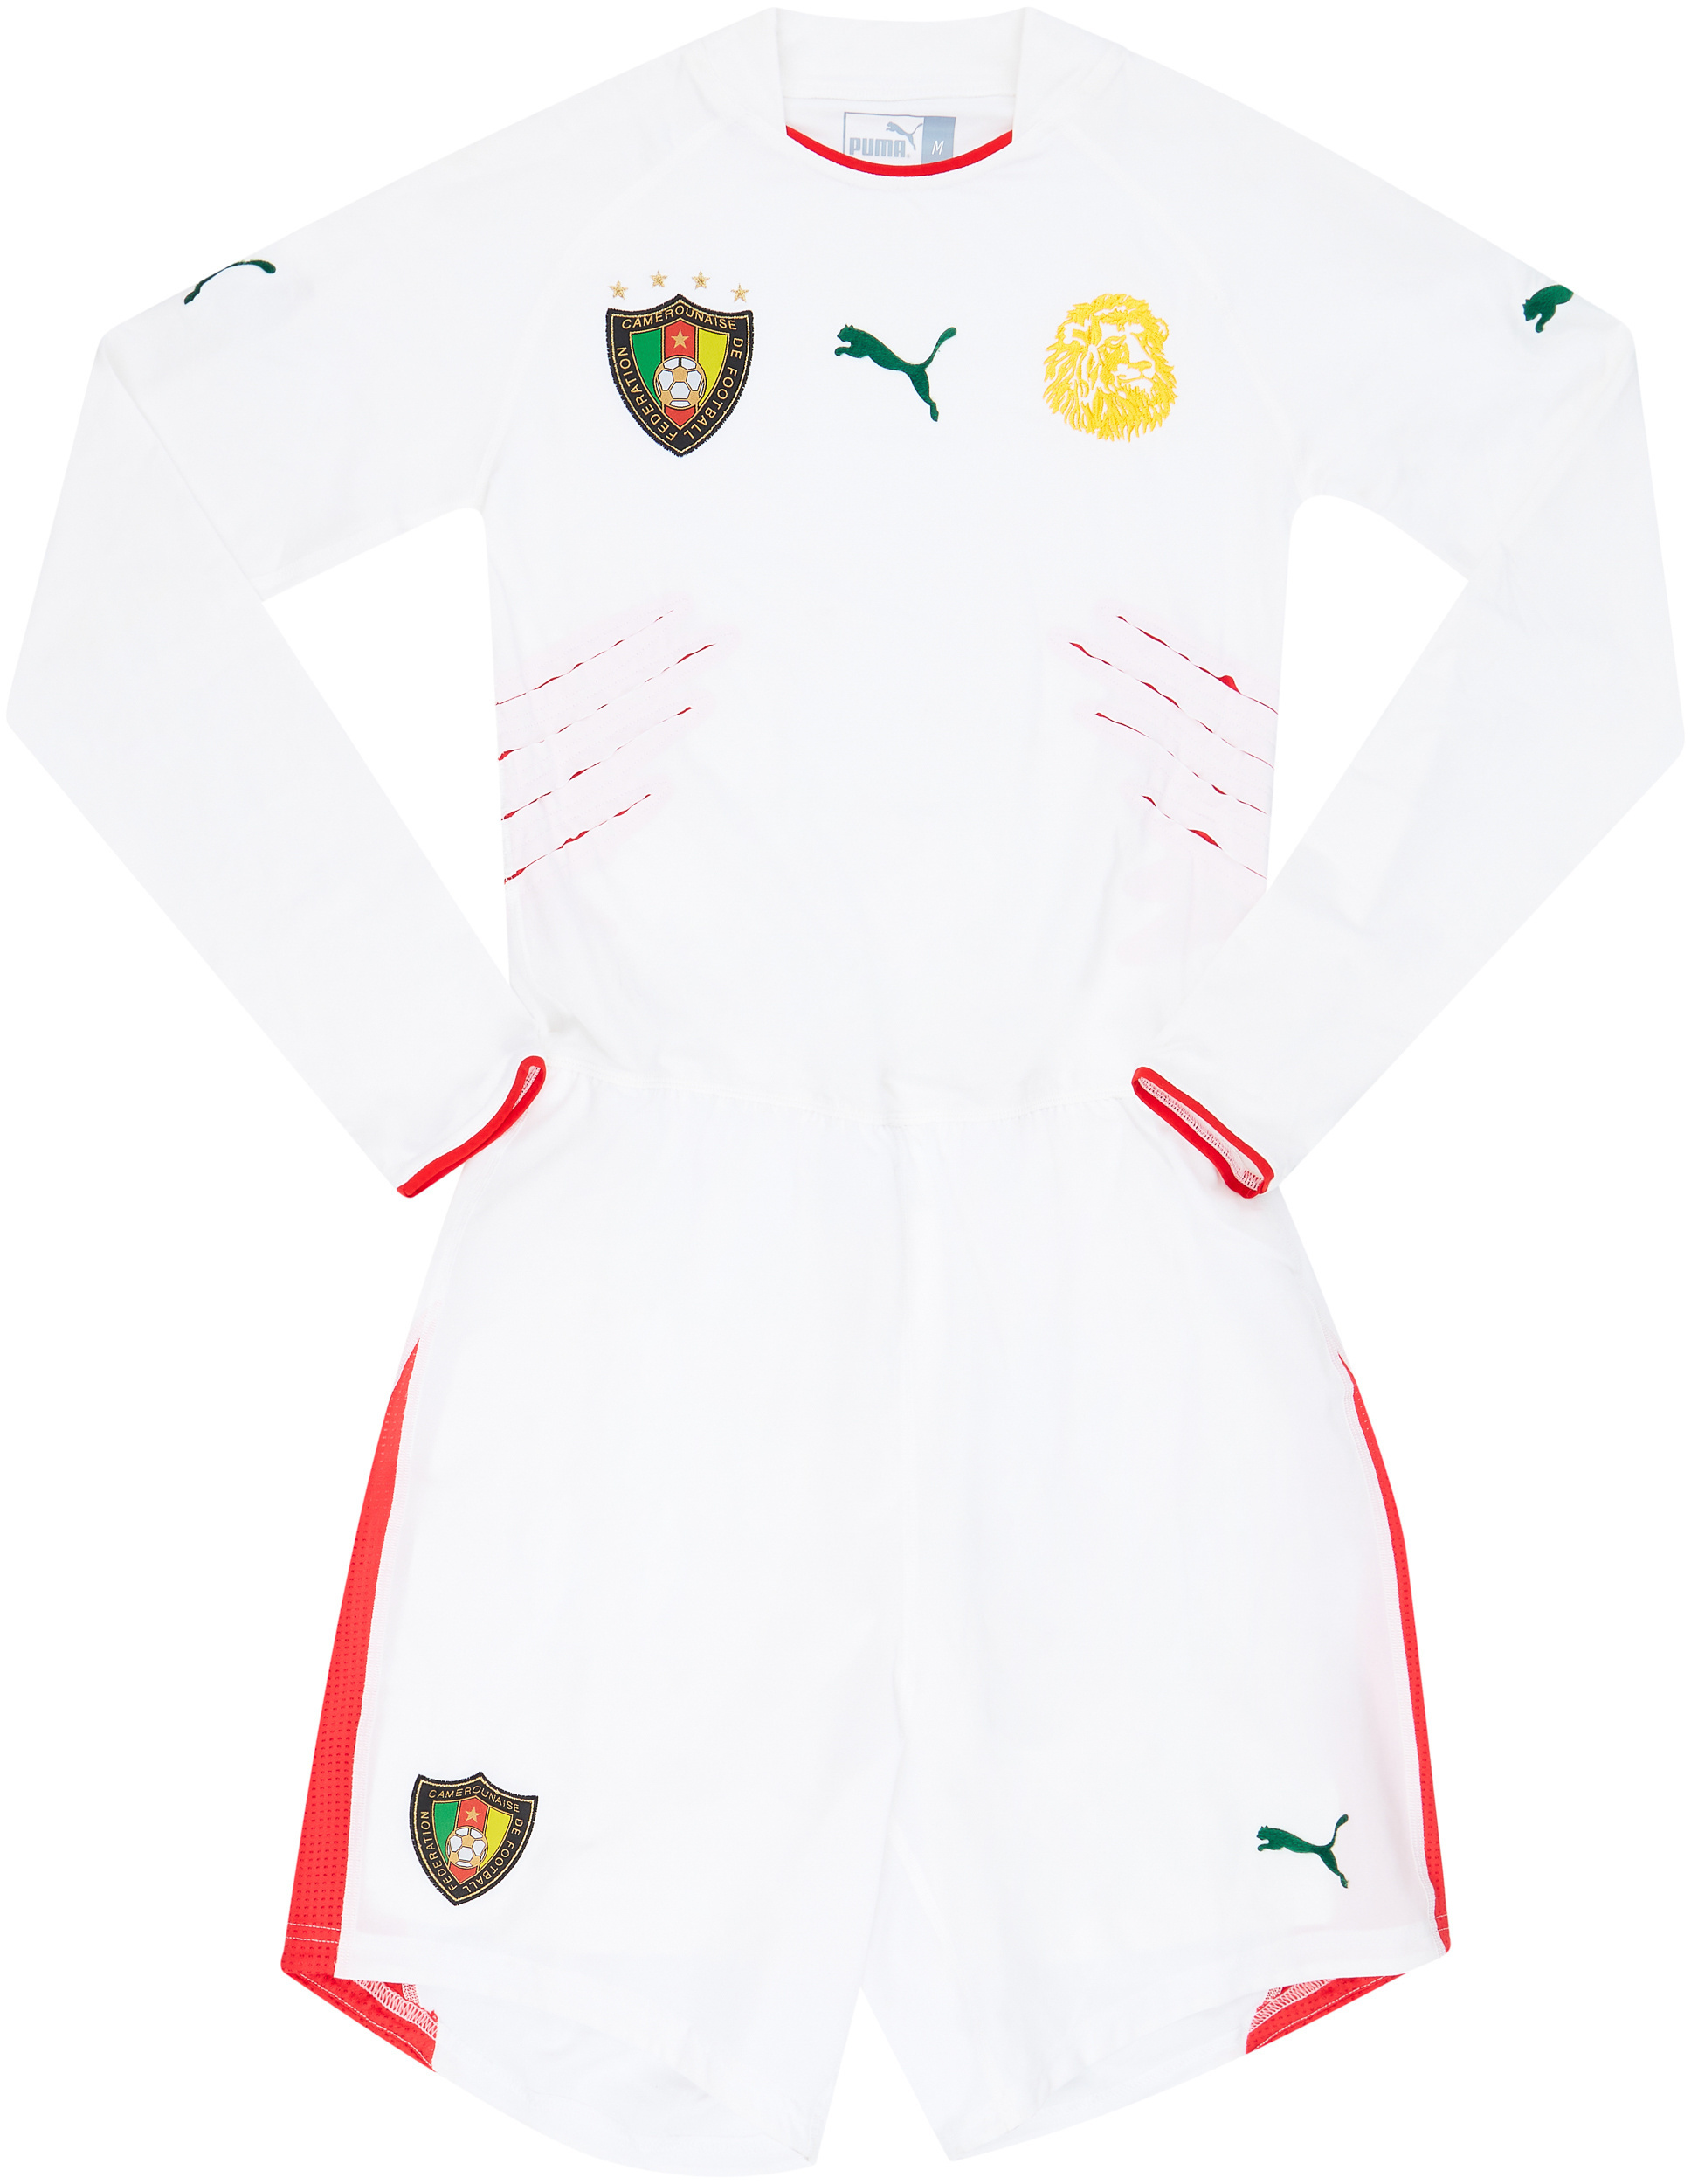 2004 Cameroon Player Issue Third One-Piece Kit - 8/10 - ()